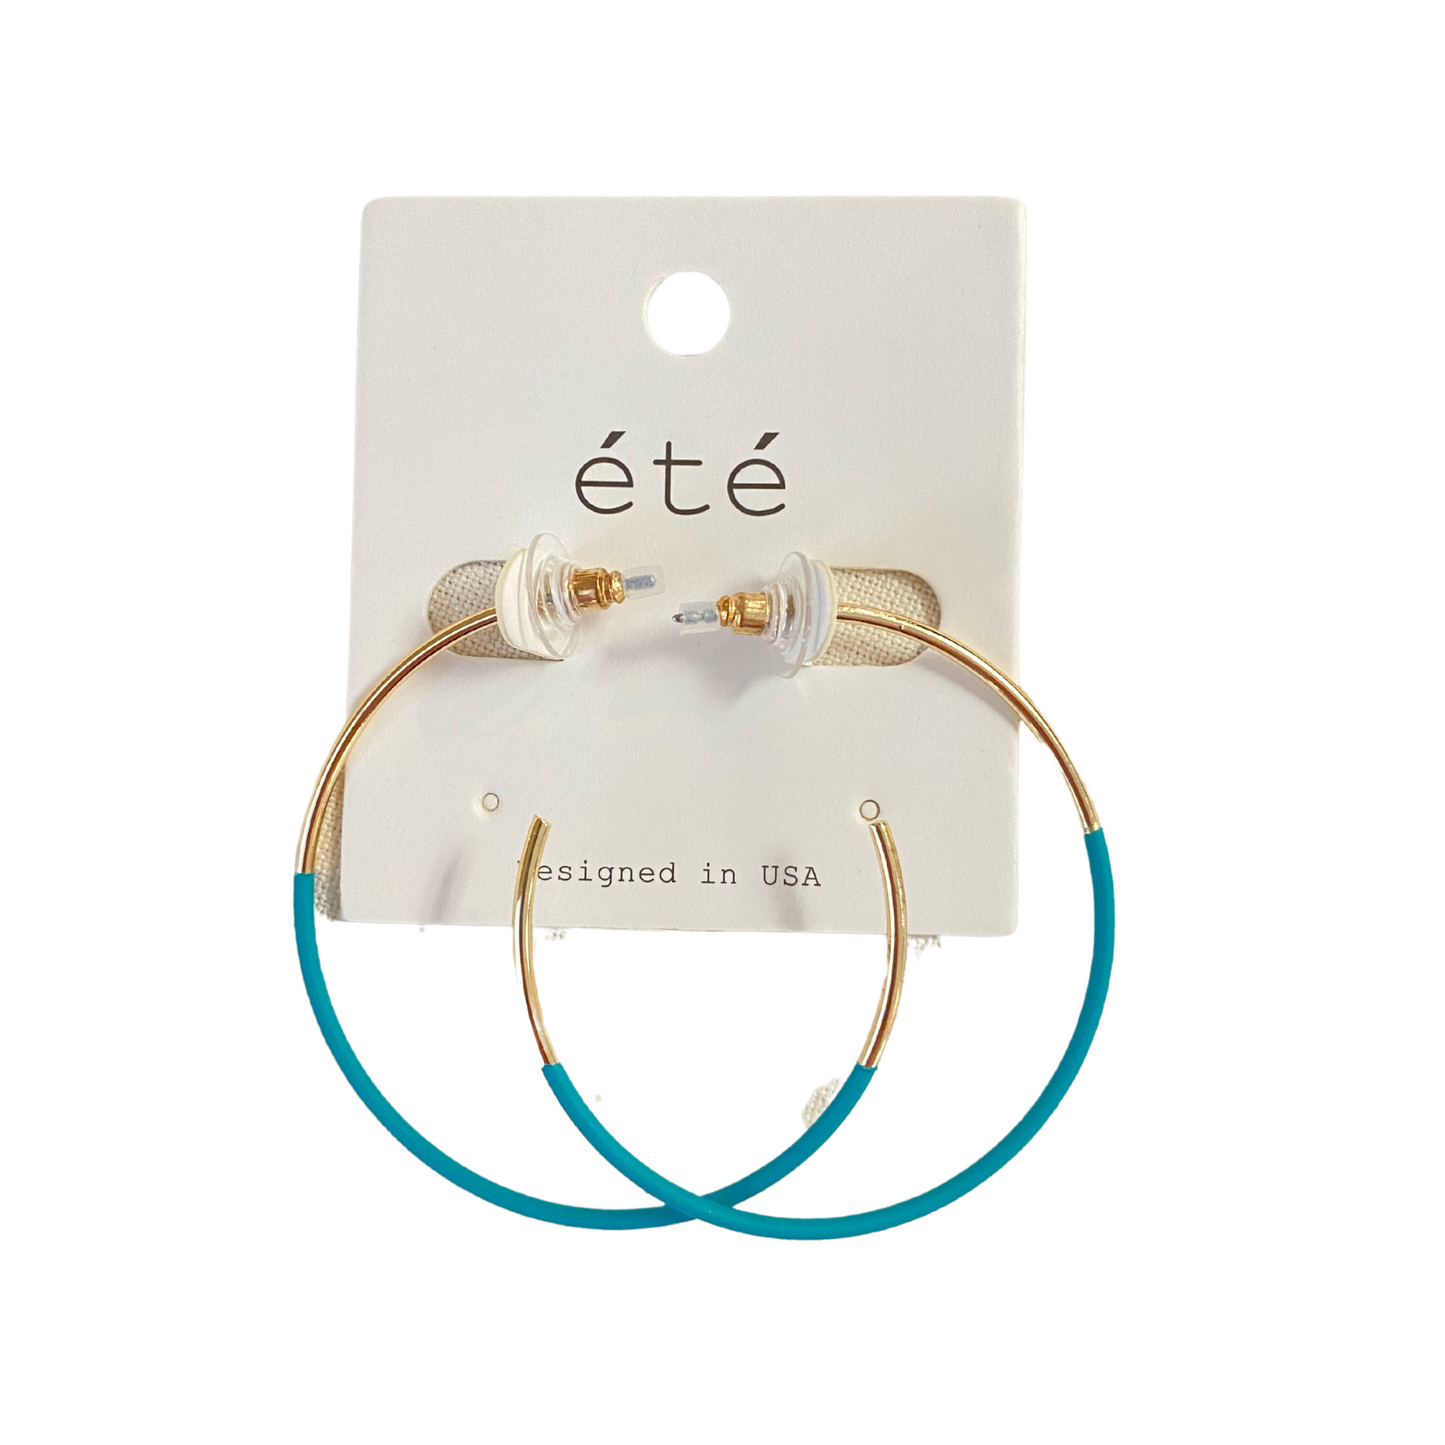 Colored Hoops offer a variety of colors and gold accents for an eye-catching look. Perfect for any occasion, these hoops are ideal for adding a pop of color to any outfit.